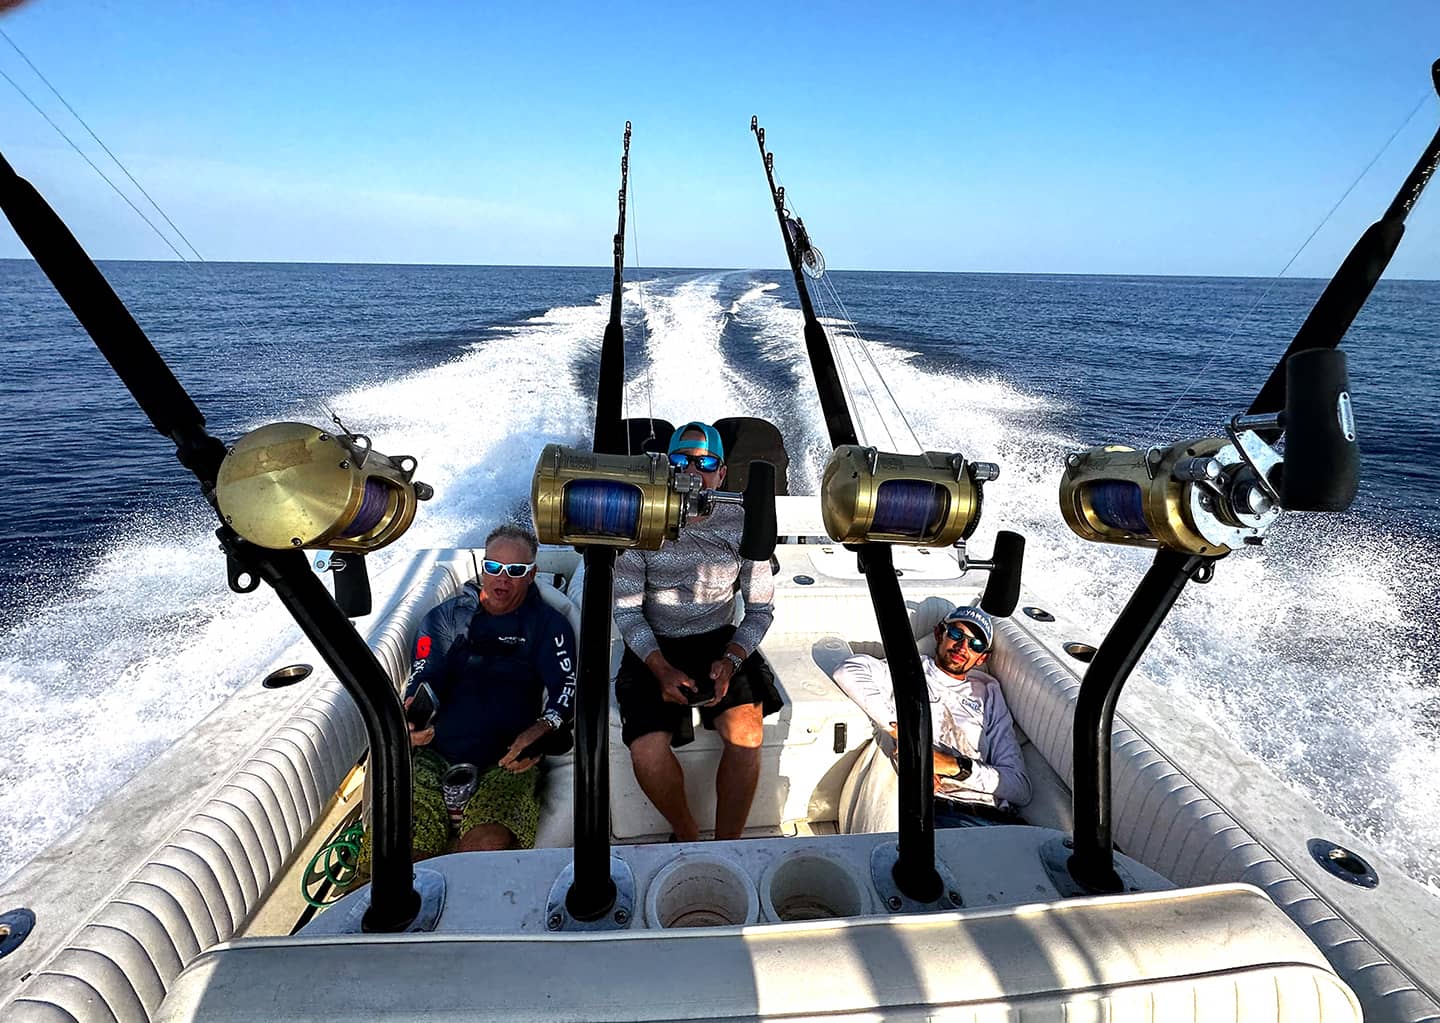 10 Reel Contender Fishing out of Delray Beach FL - Day Time Charter with the Boyz